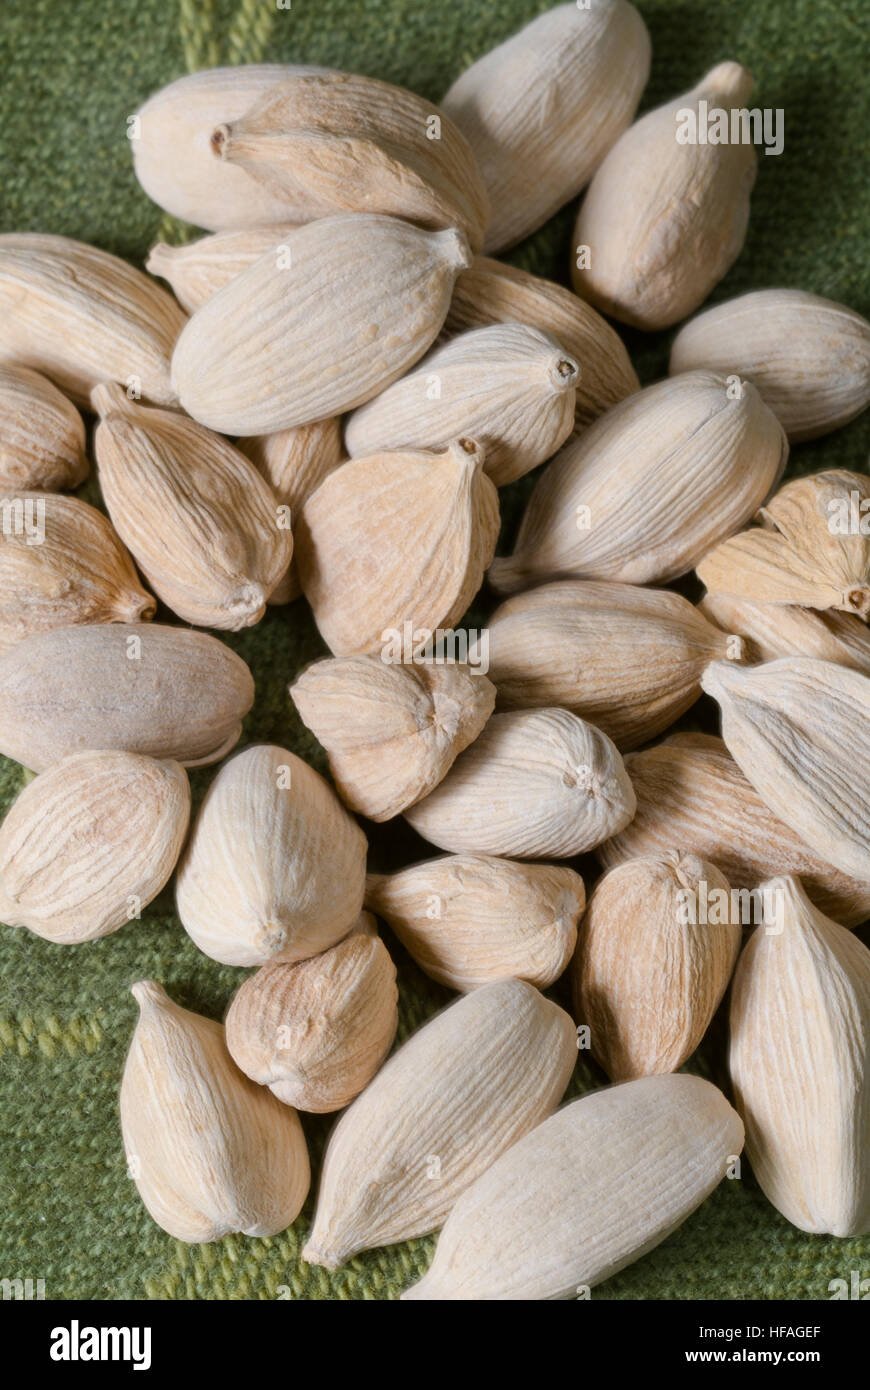 Cardamom seed pods Ellettaria cardamomum spice, dried harvested in pile closeup macro image food Asian Indian Thai cuisine Stock Photo